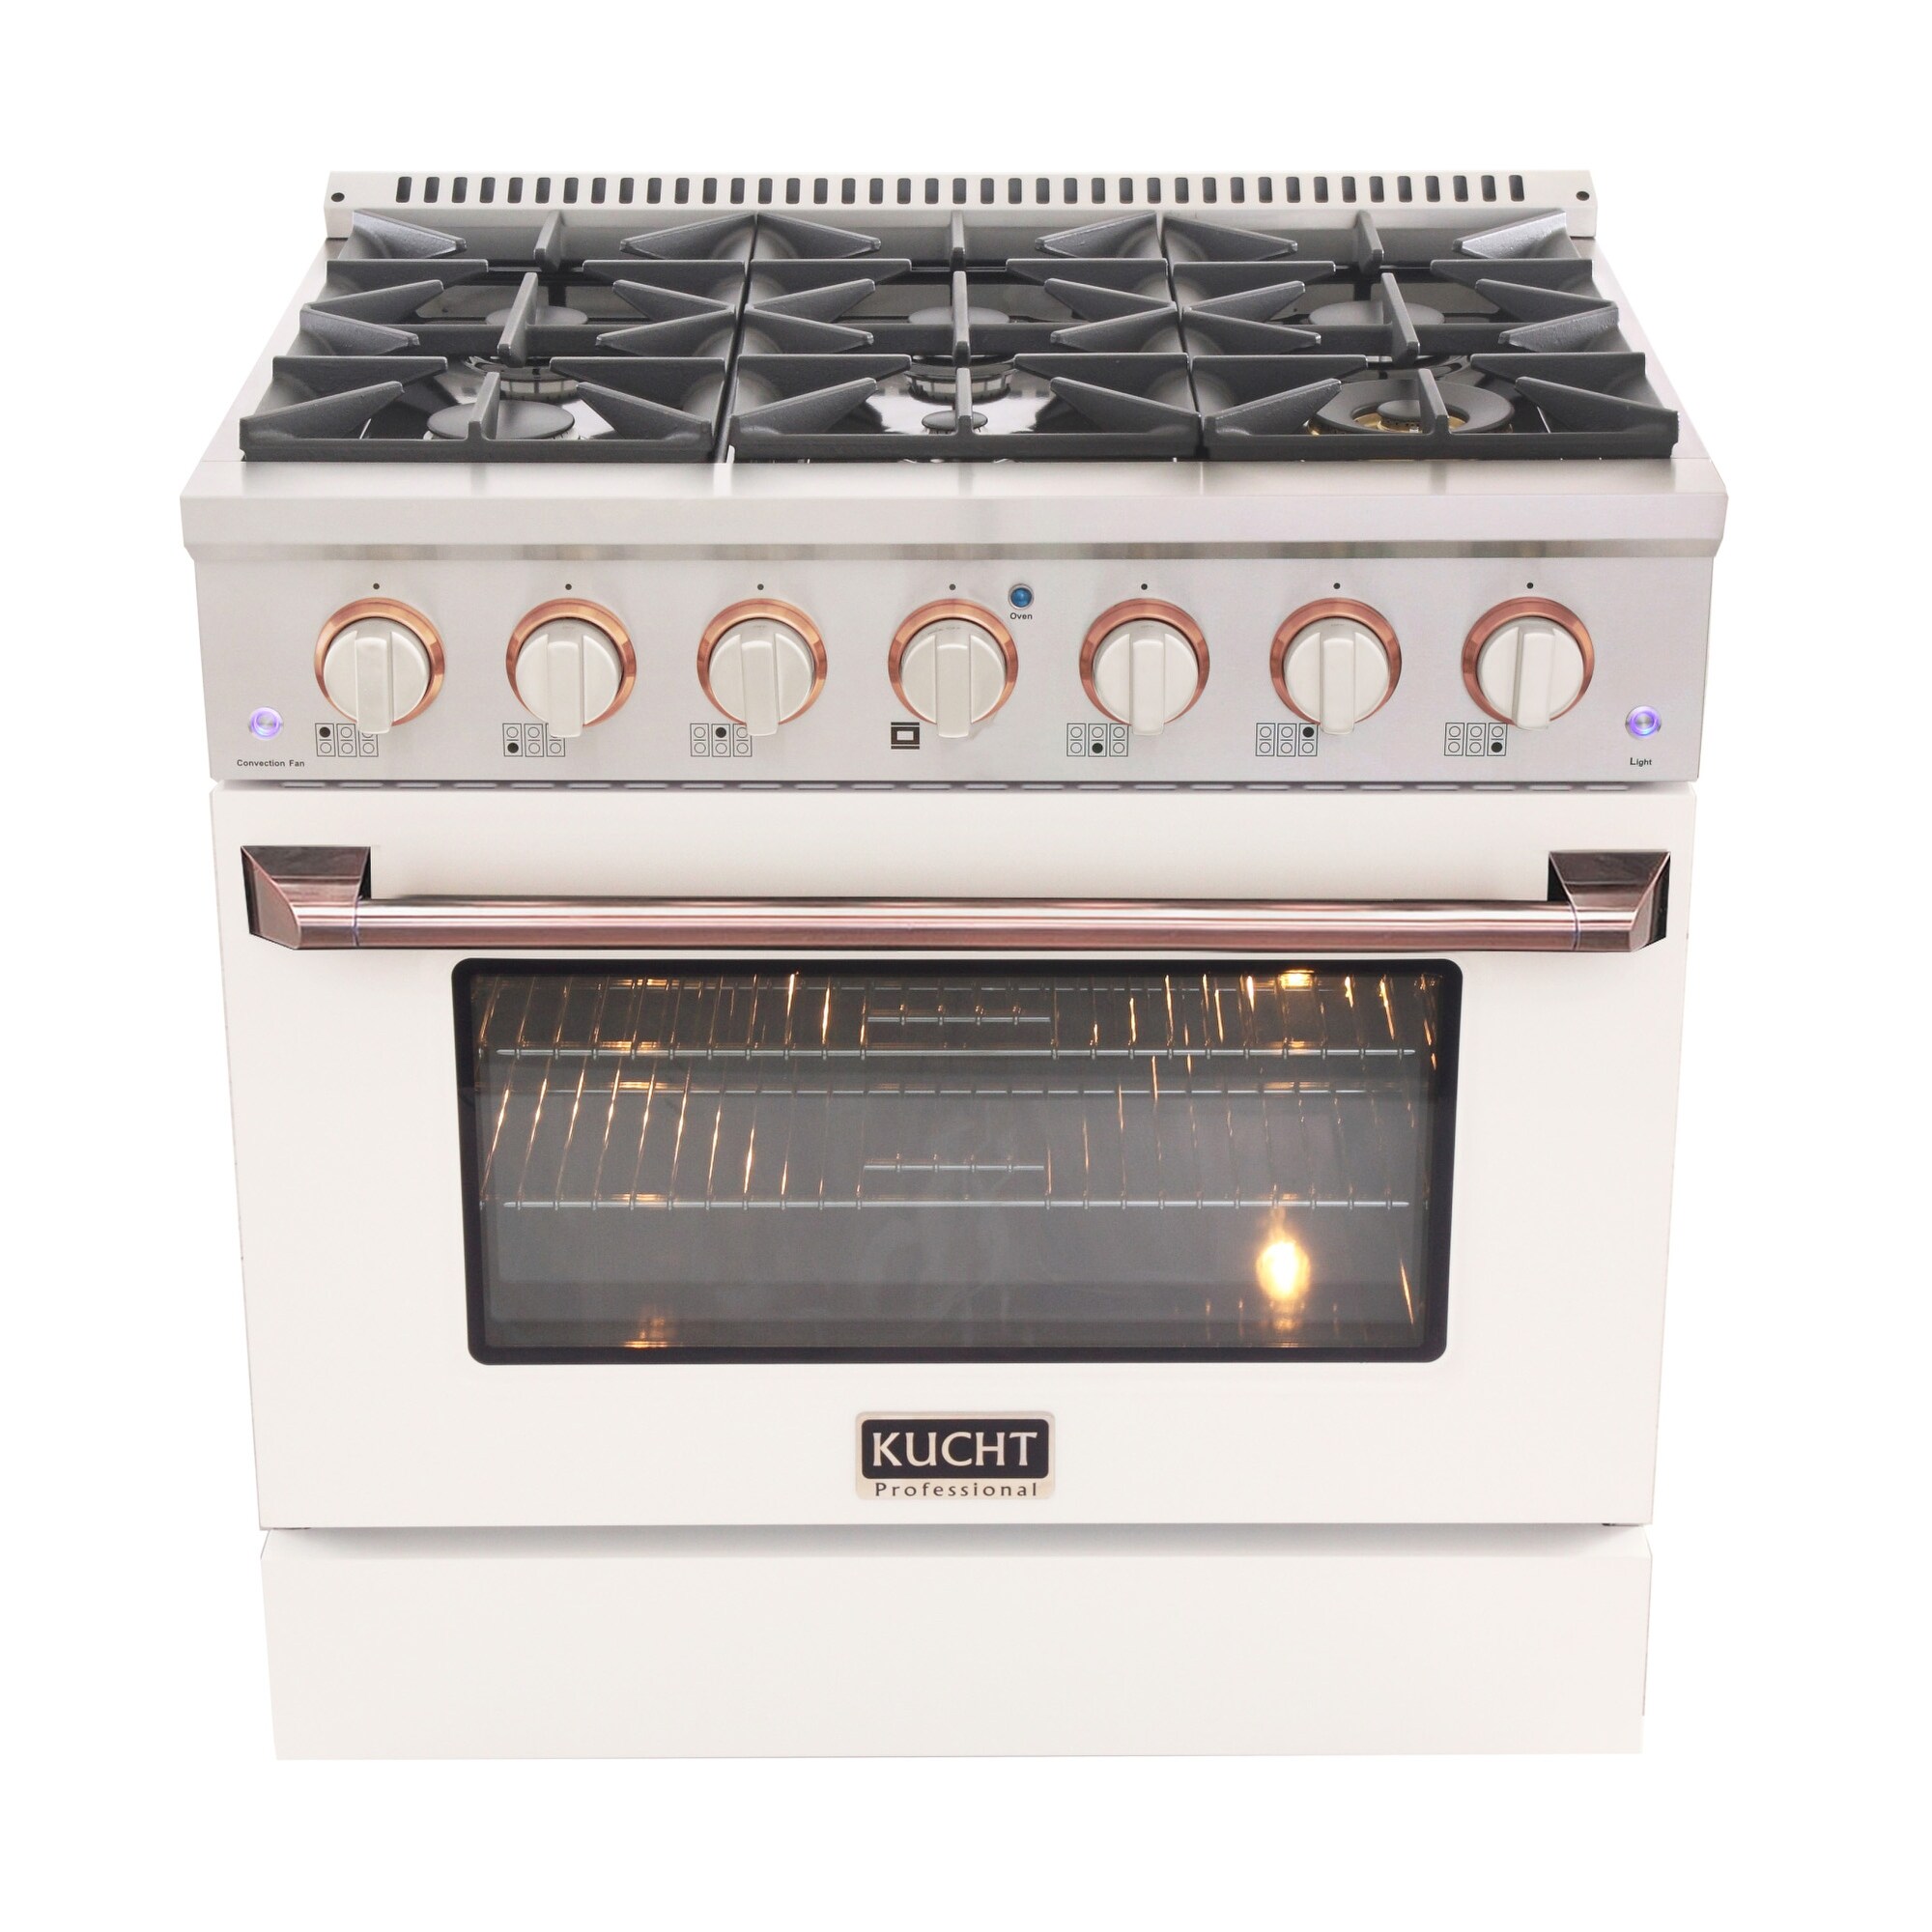 KUCHT Customized Professional 36 in. 5.2 cu. ft. Natural Gas Range w/ Sealed Burners and Convection Oven